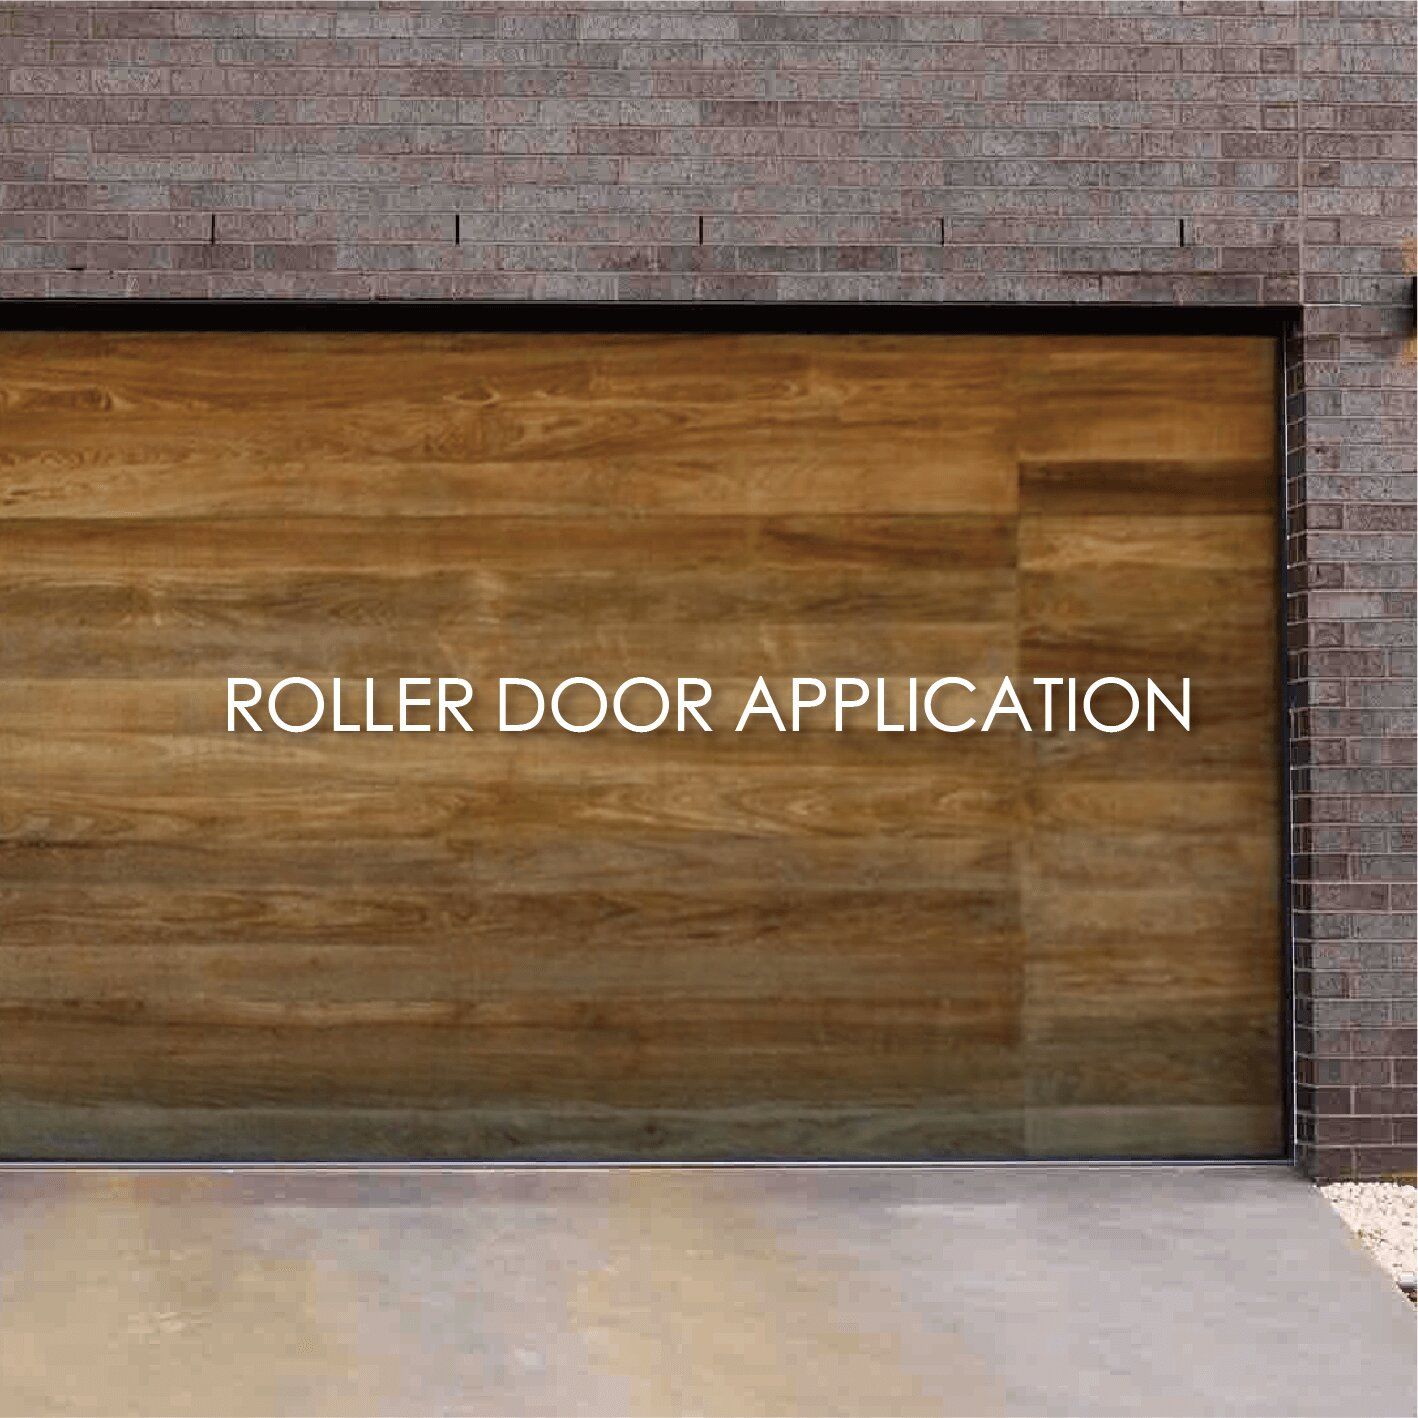 Using laminated metal decorative roll door can create aesthetics and durability